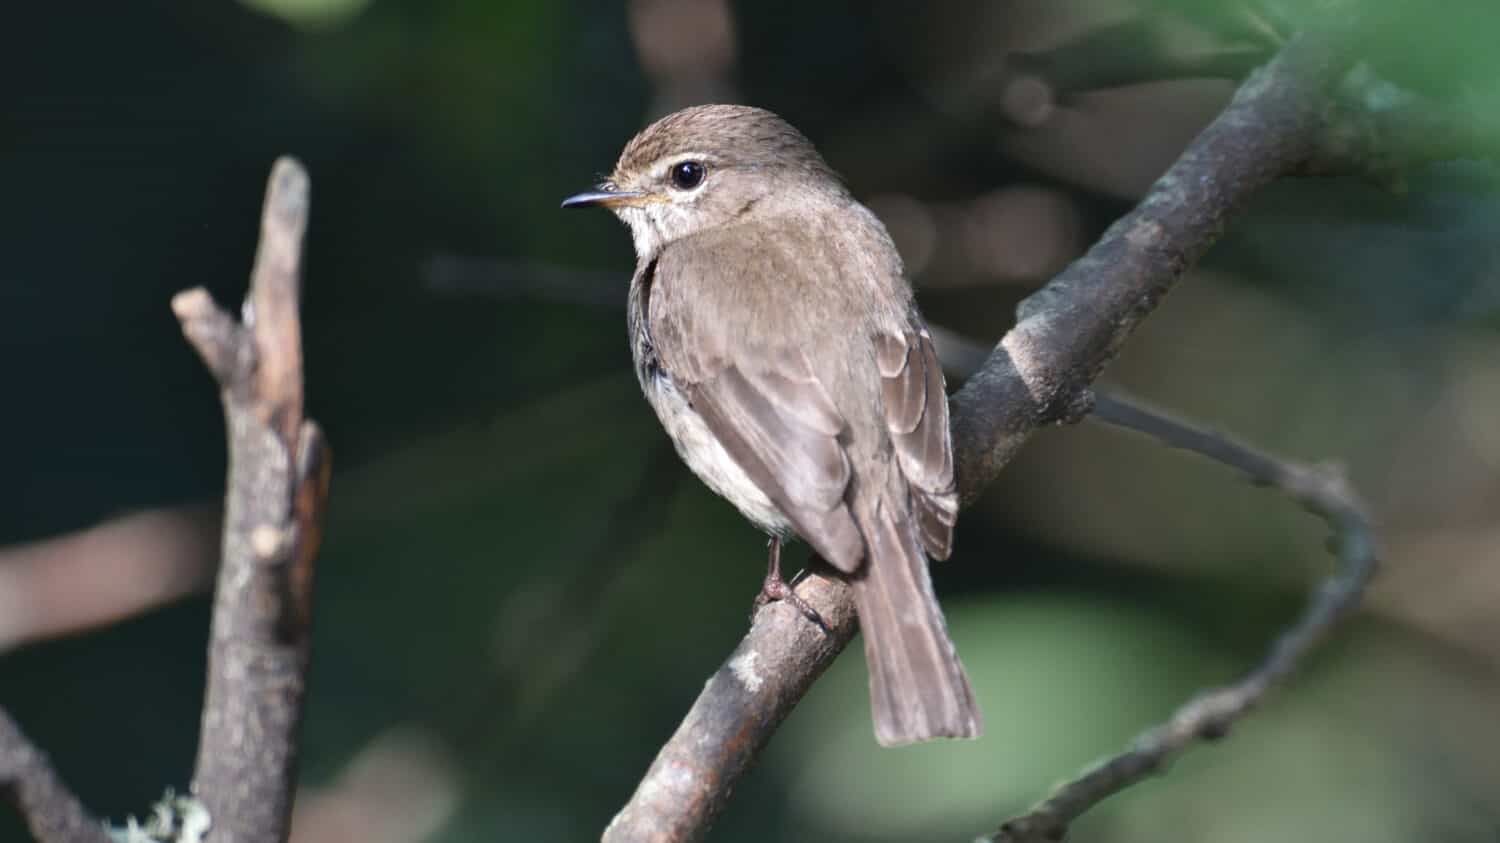 African Dusky Flycatcher, Muscicapa adusta, master insect catcher